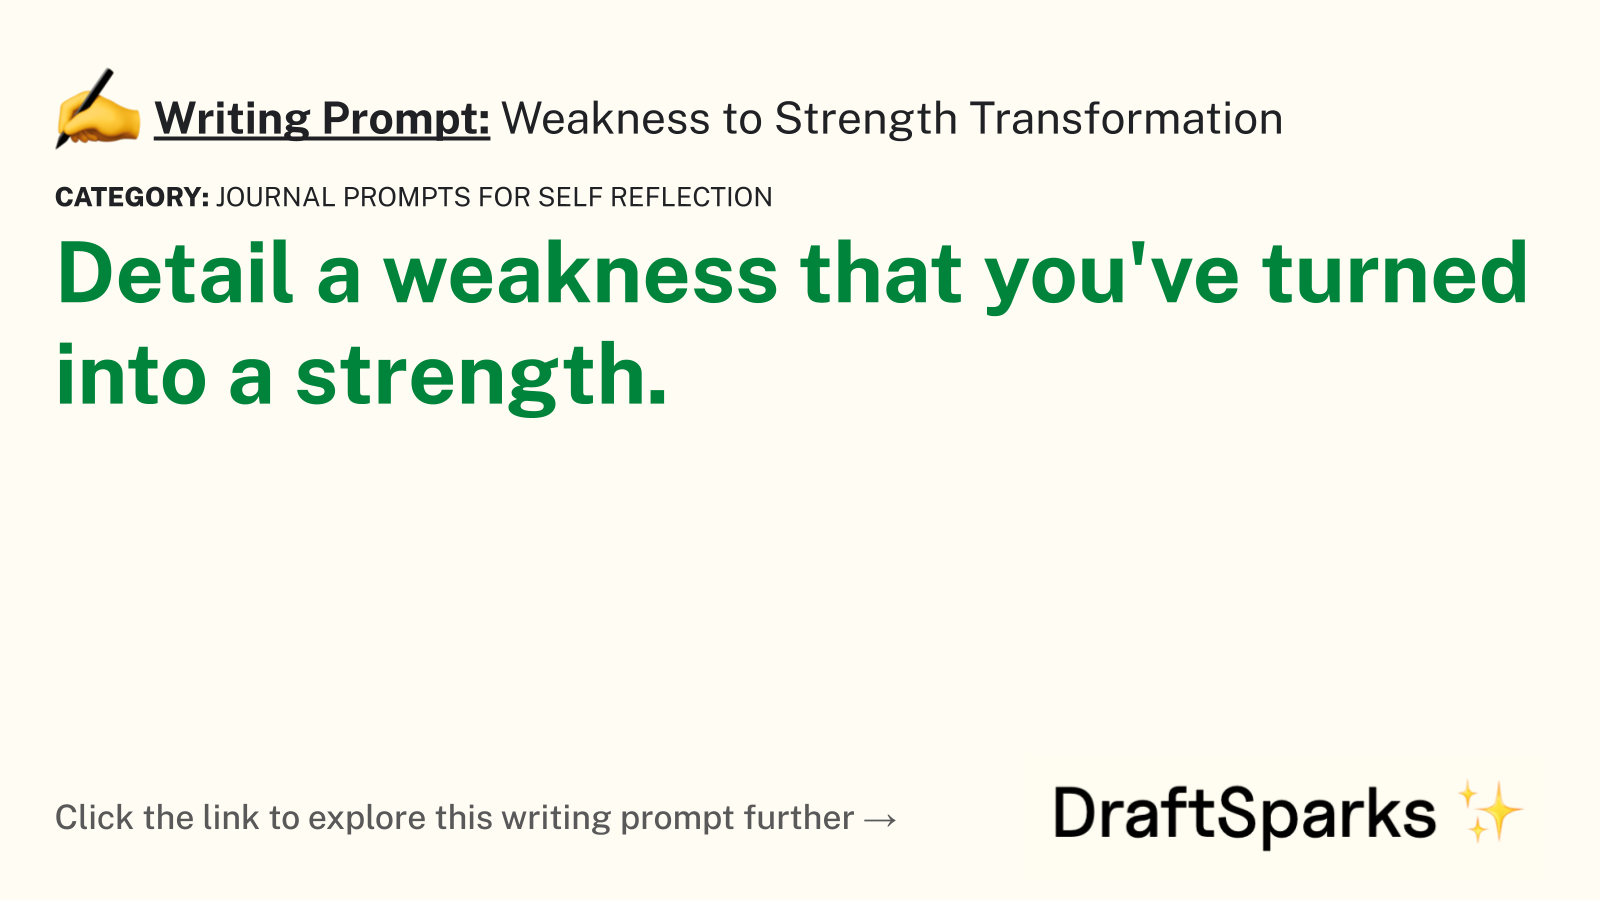 Weakness to Strength Transformation